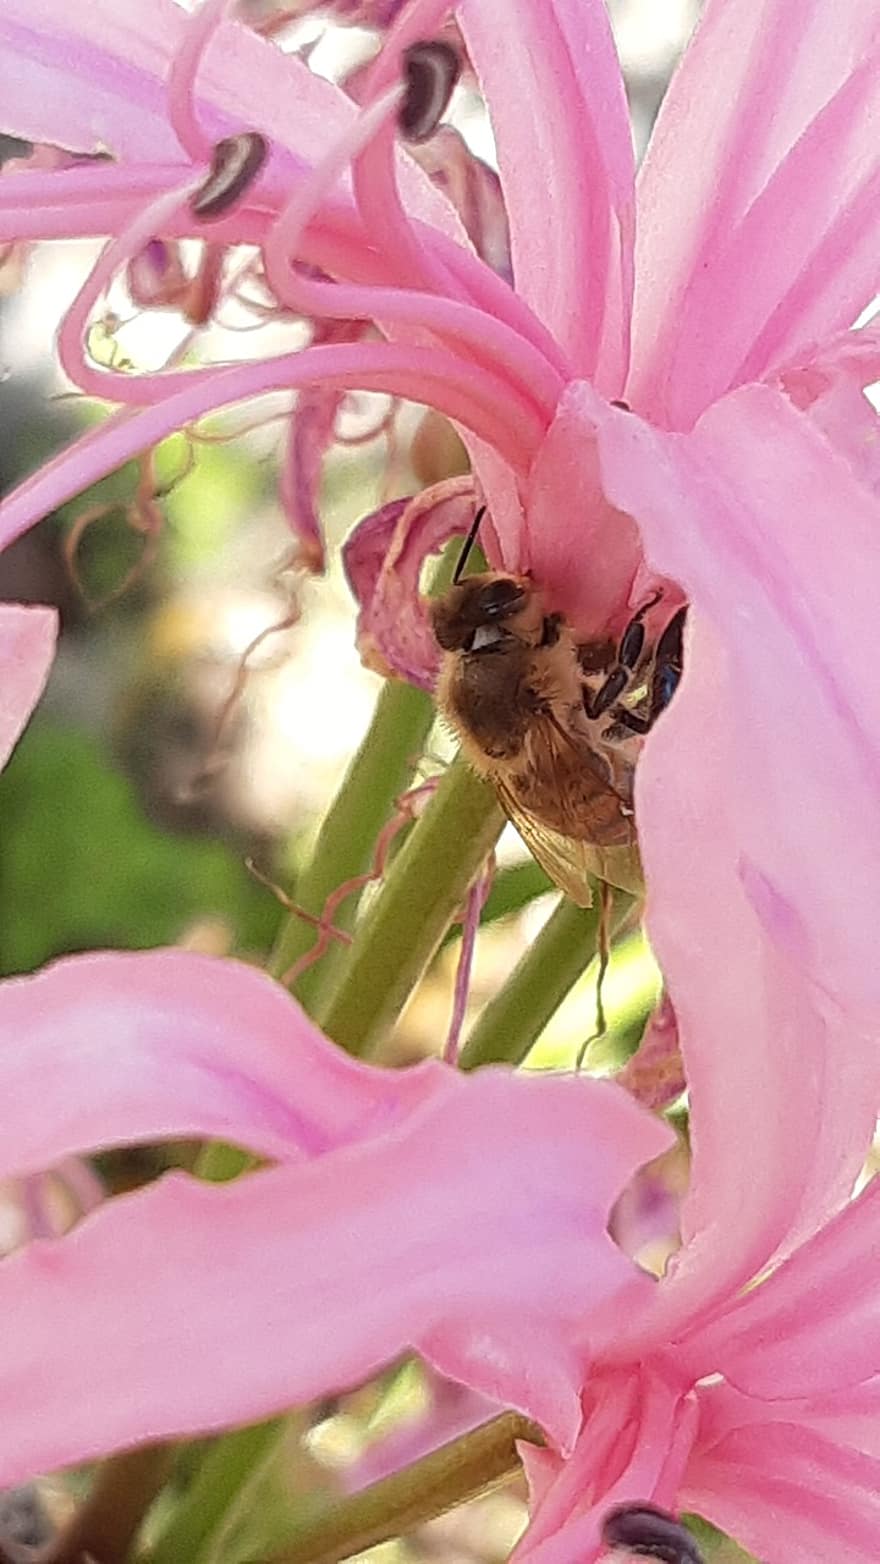 Flower, Bee, Pollination, Nerine Bodwenii, Nature, Bloom, Insect, close-up, macro, plant, summer